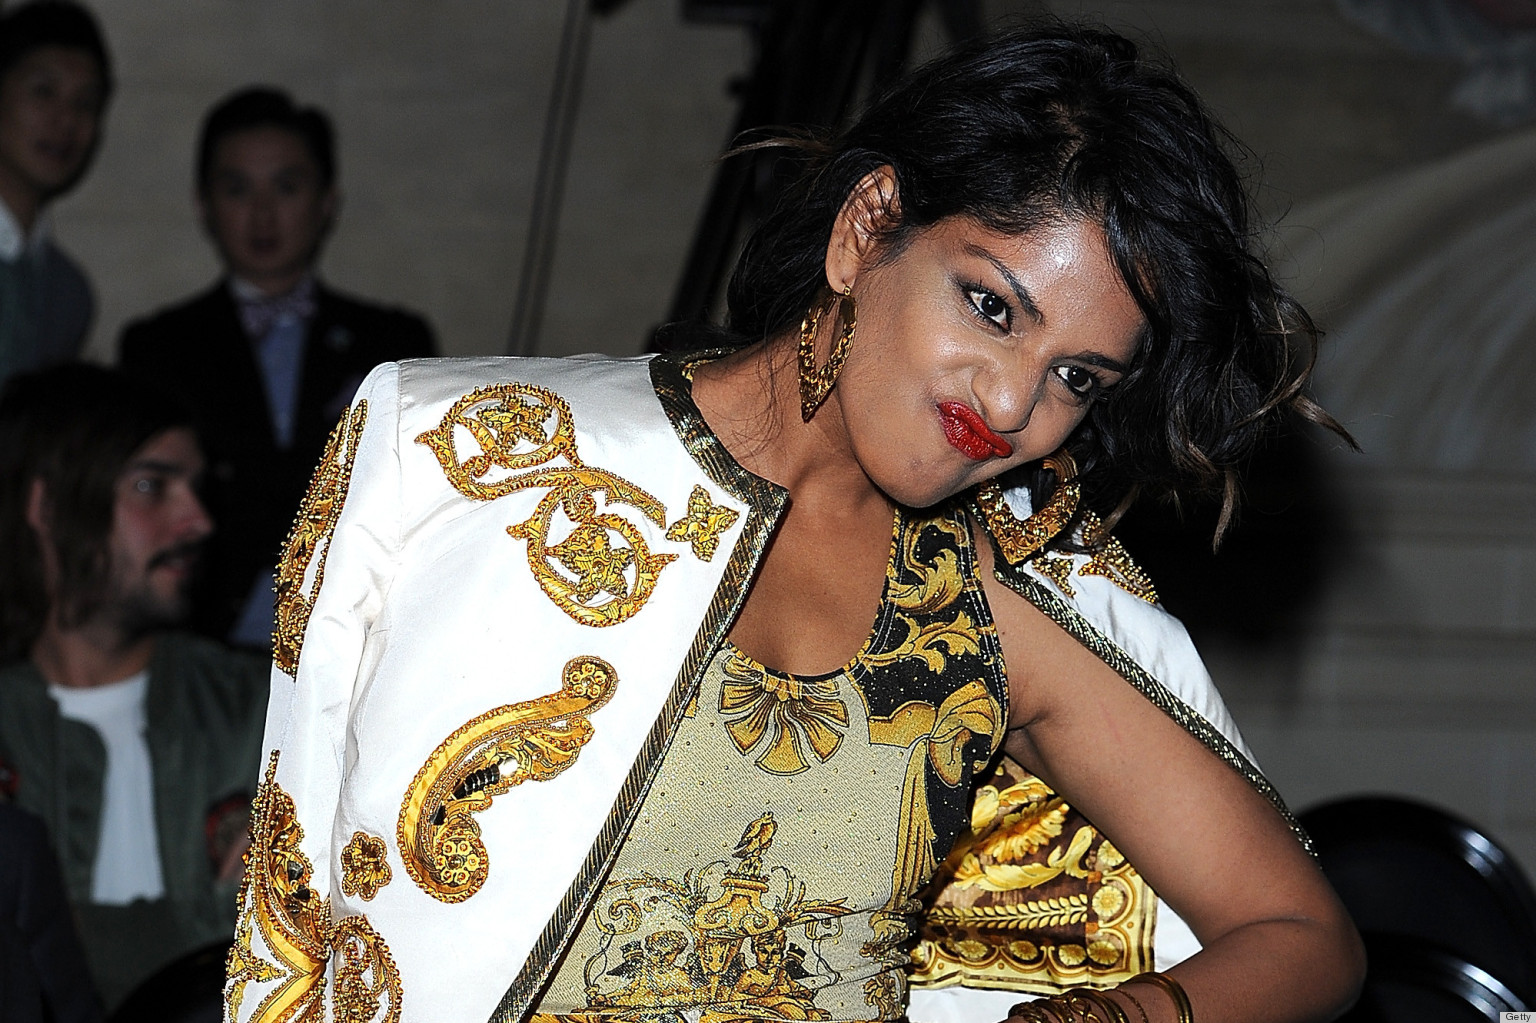 M.I.A. Bring The Noize